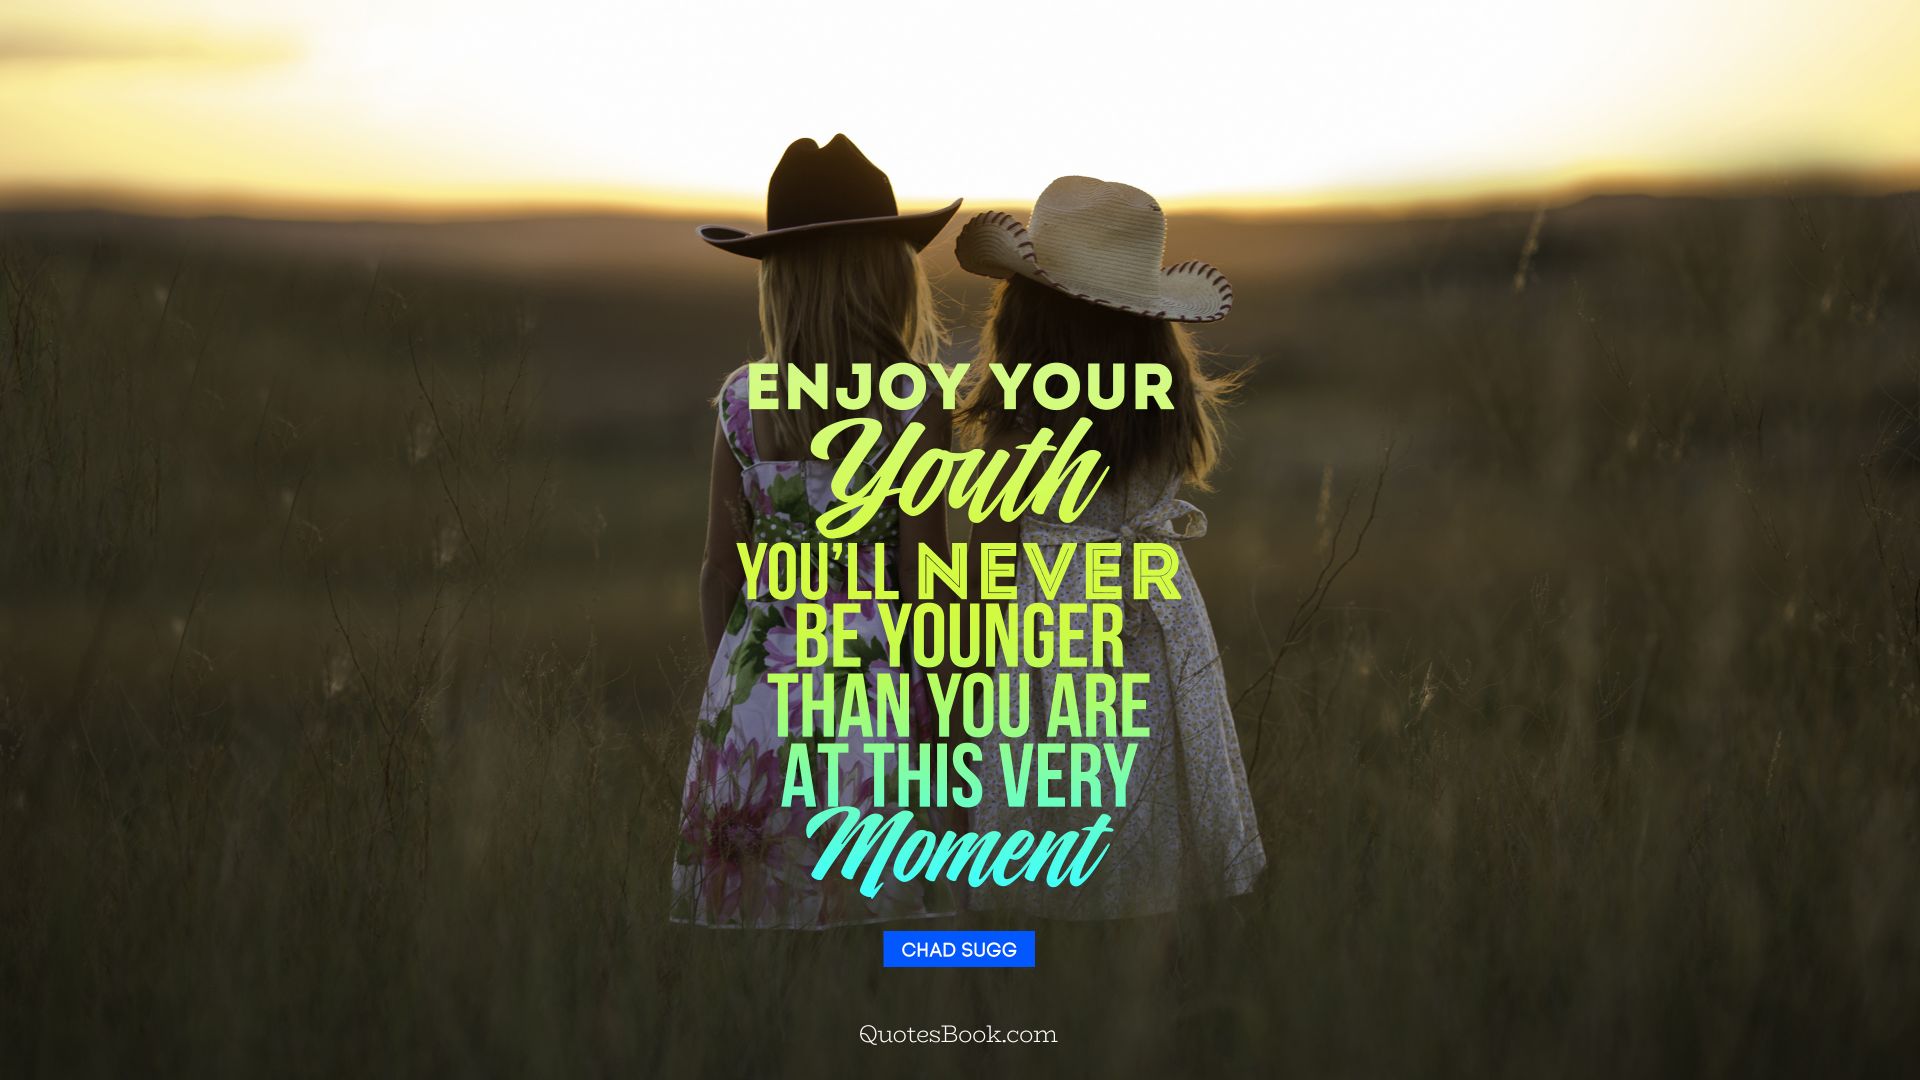 Enjoy your youth, you will never be younger than you are at this very momen...